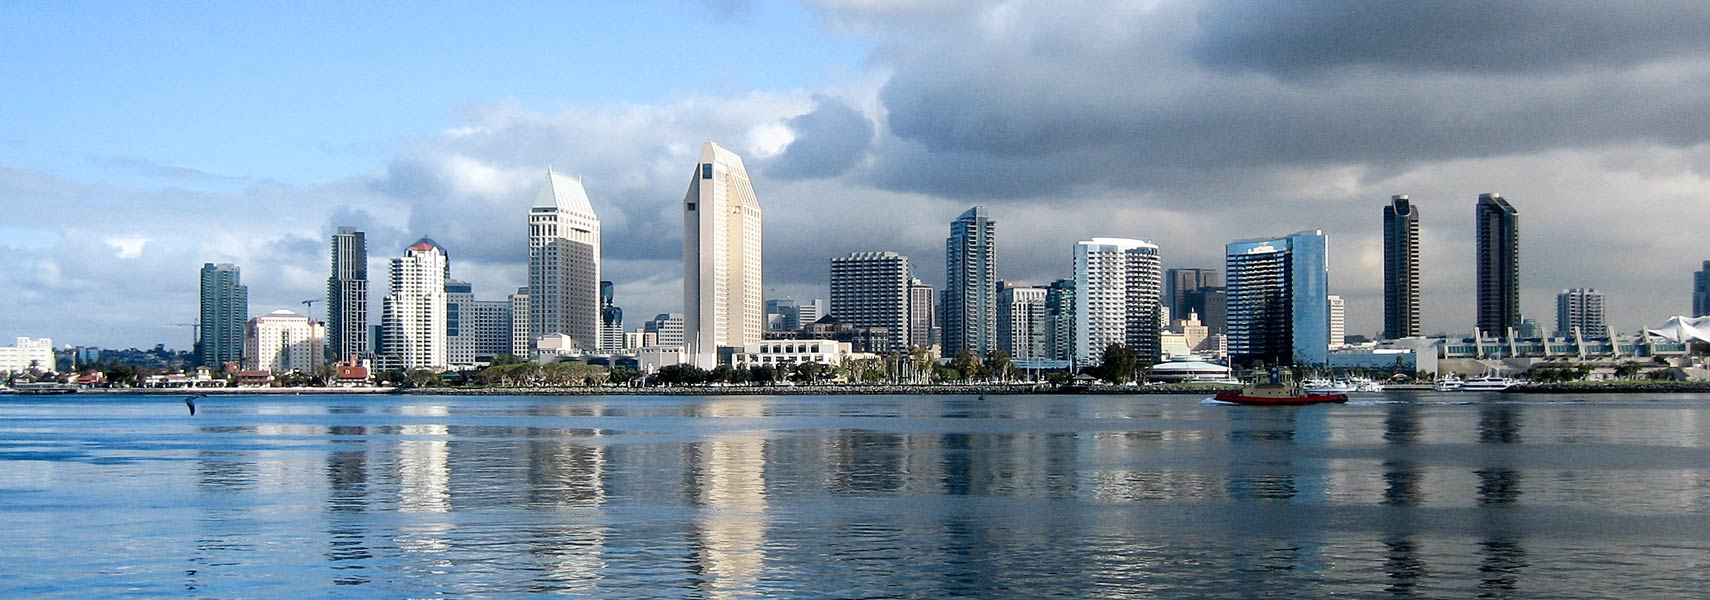 Google Map Of The City Of San Diego, California - Nations Online Project - City Map Of San Diego California